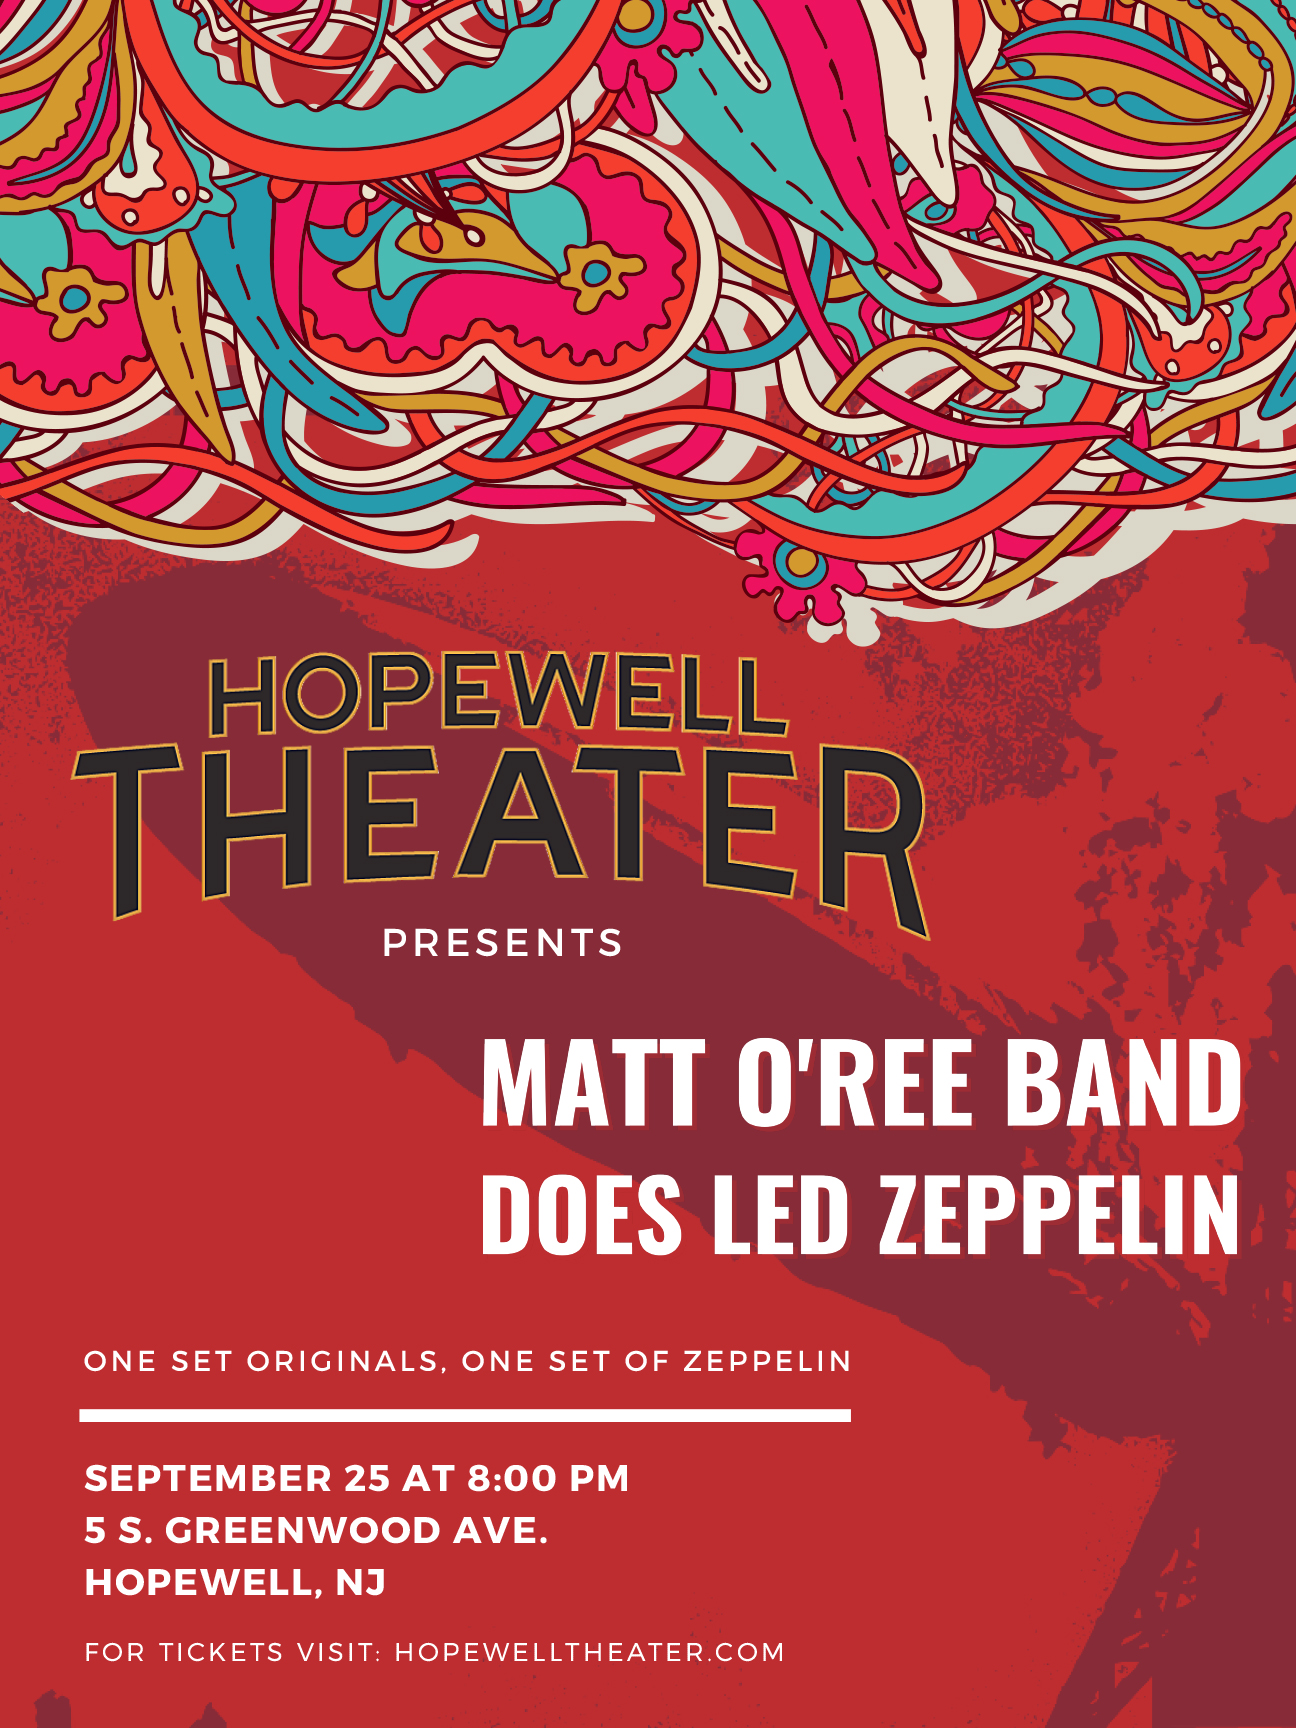 Matt O'Ree Band Does Led Zeppelin at Hopewell Theater